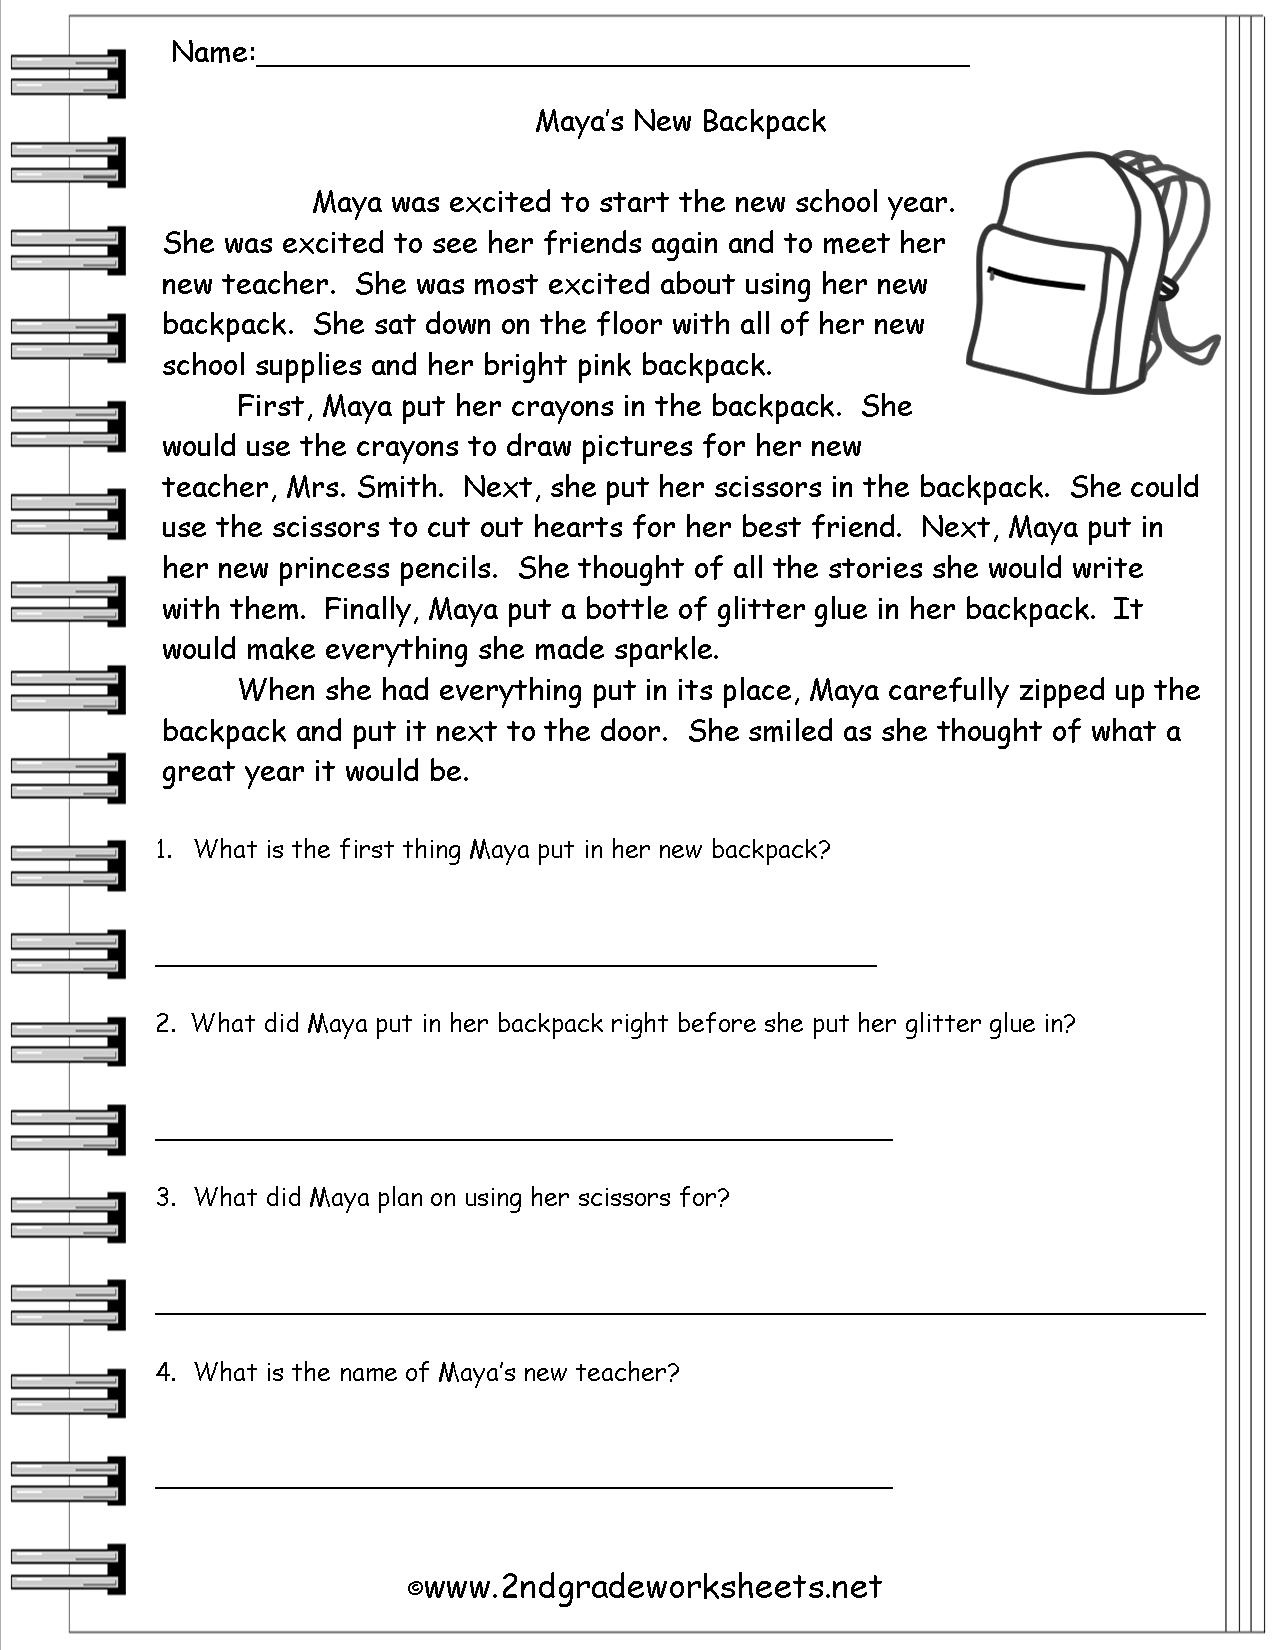 reading-passages-with-questions-printable-reading-comprehension